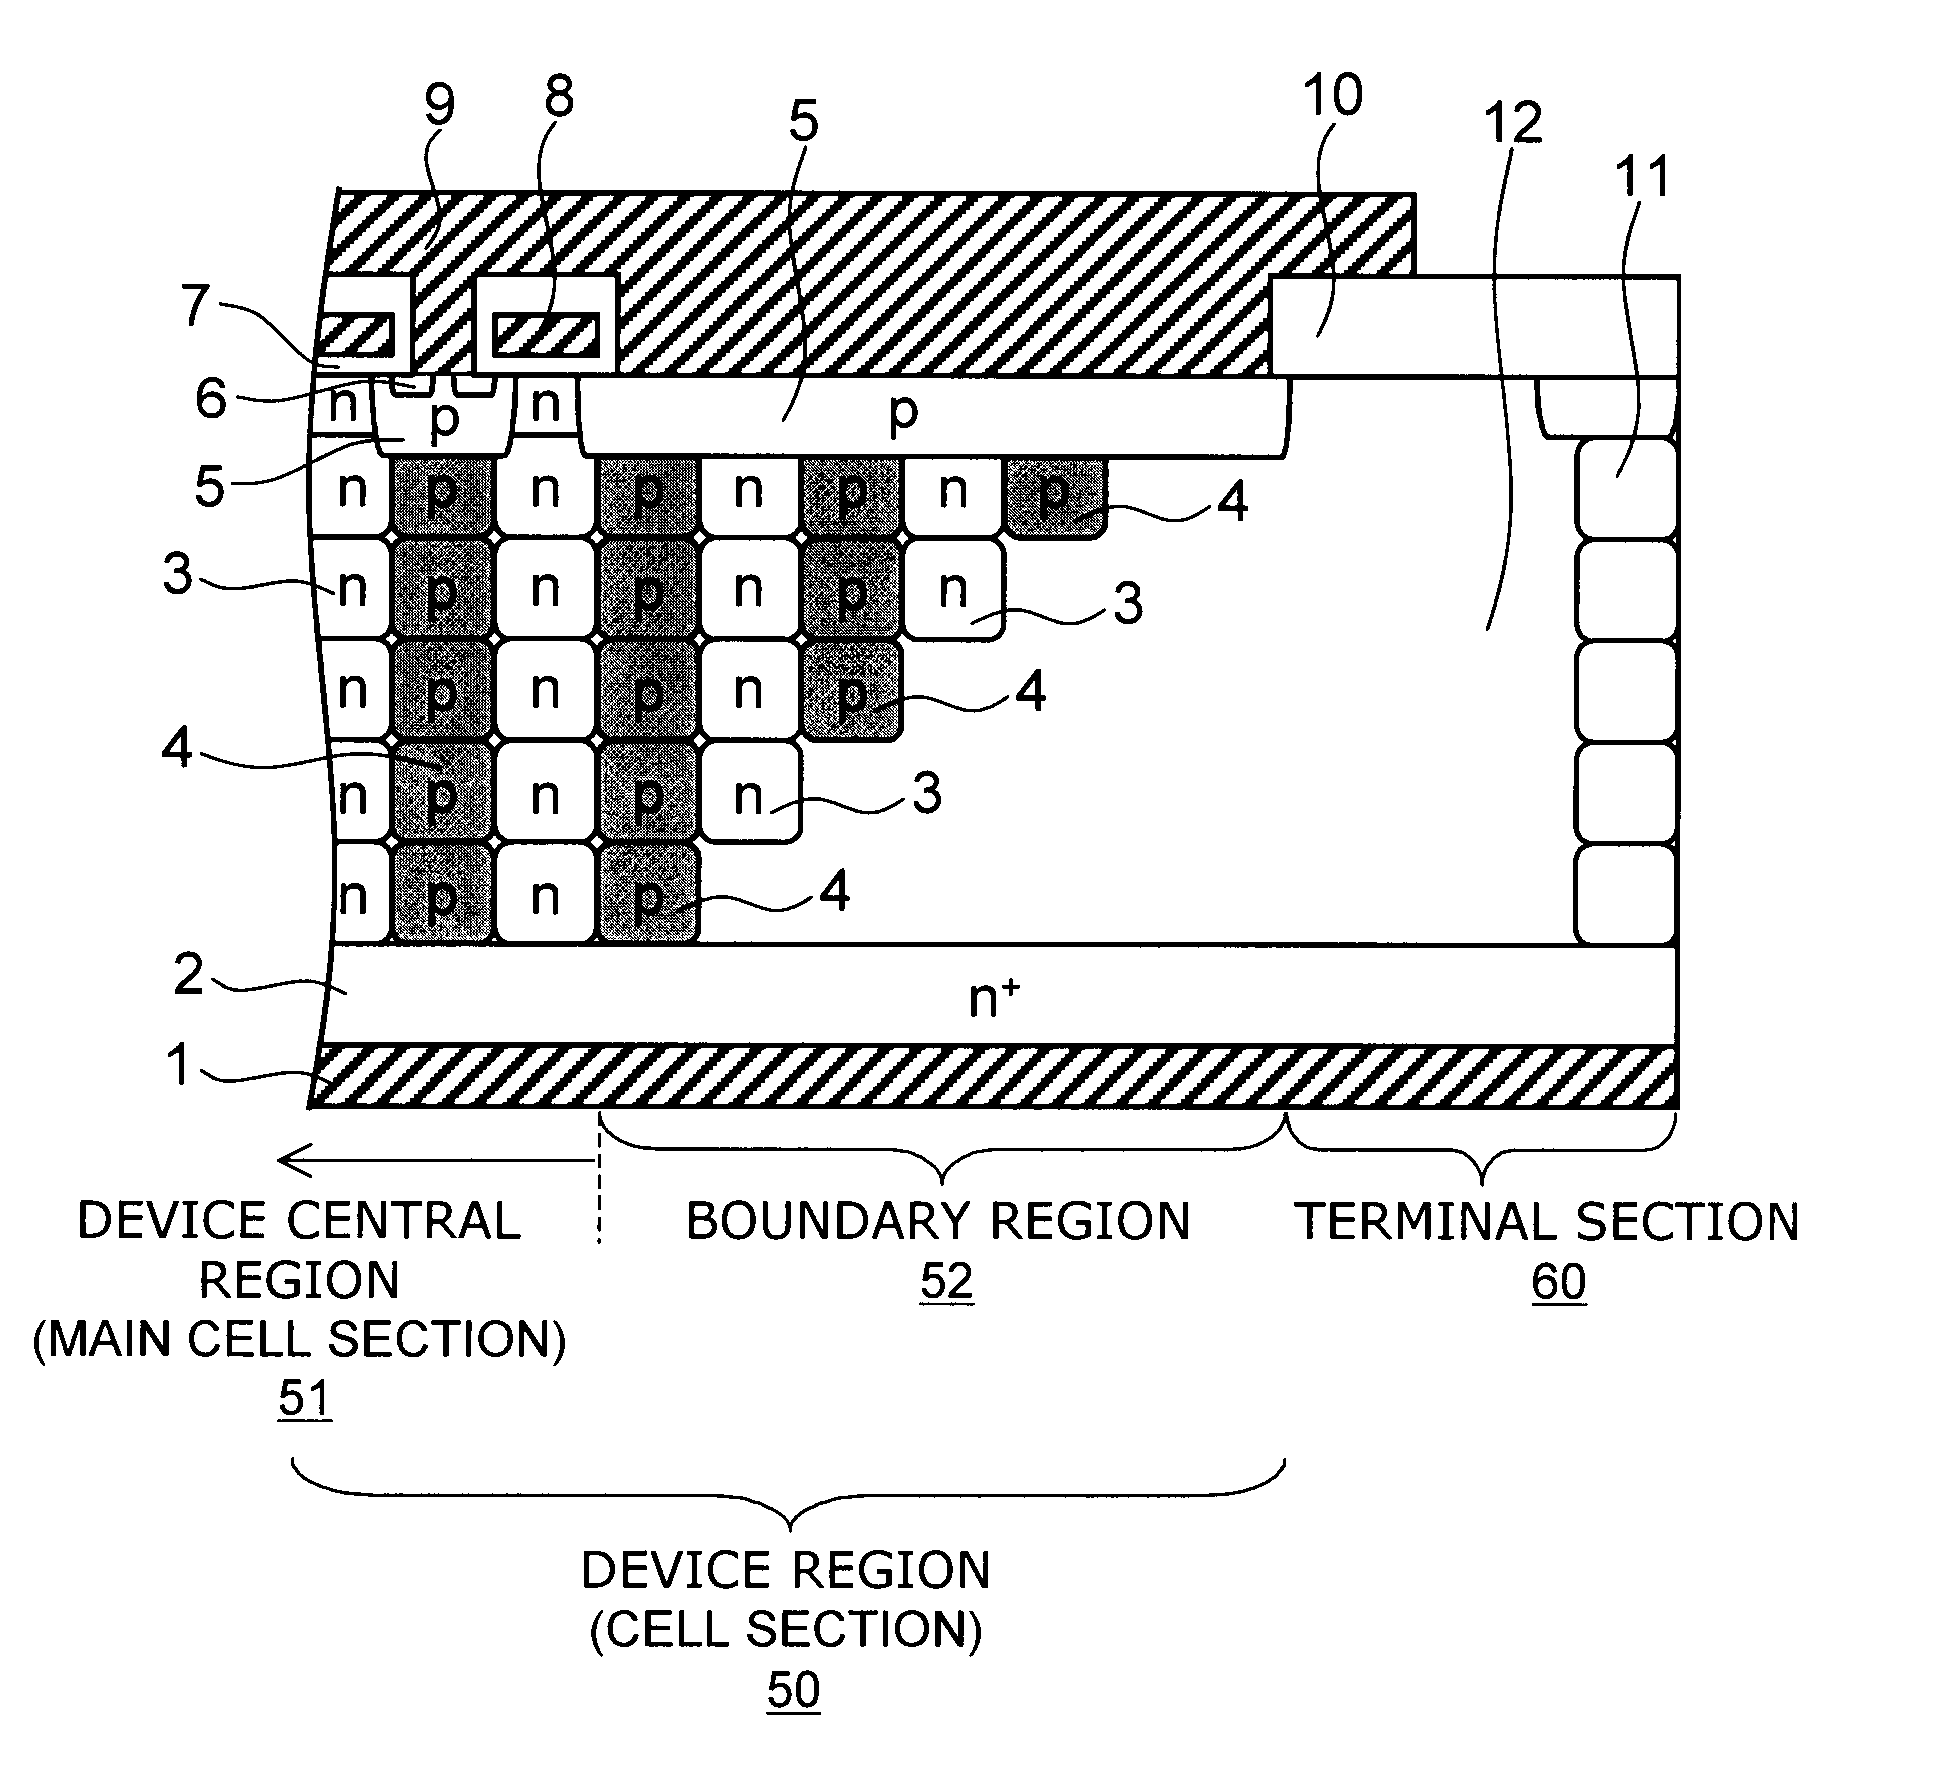 Semiconductor device